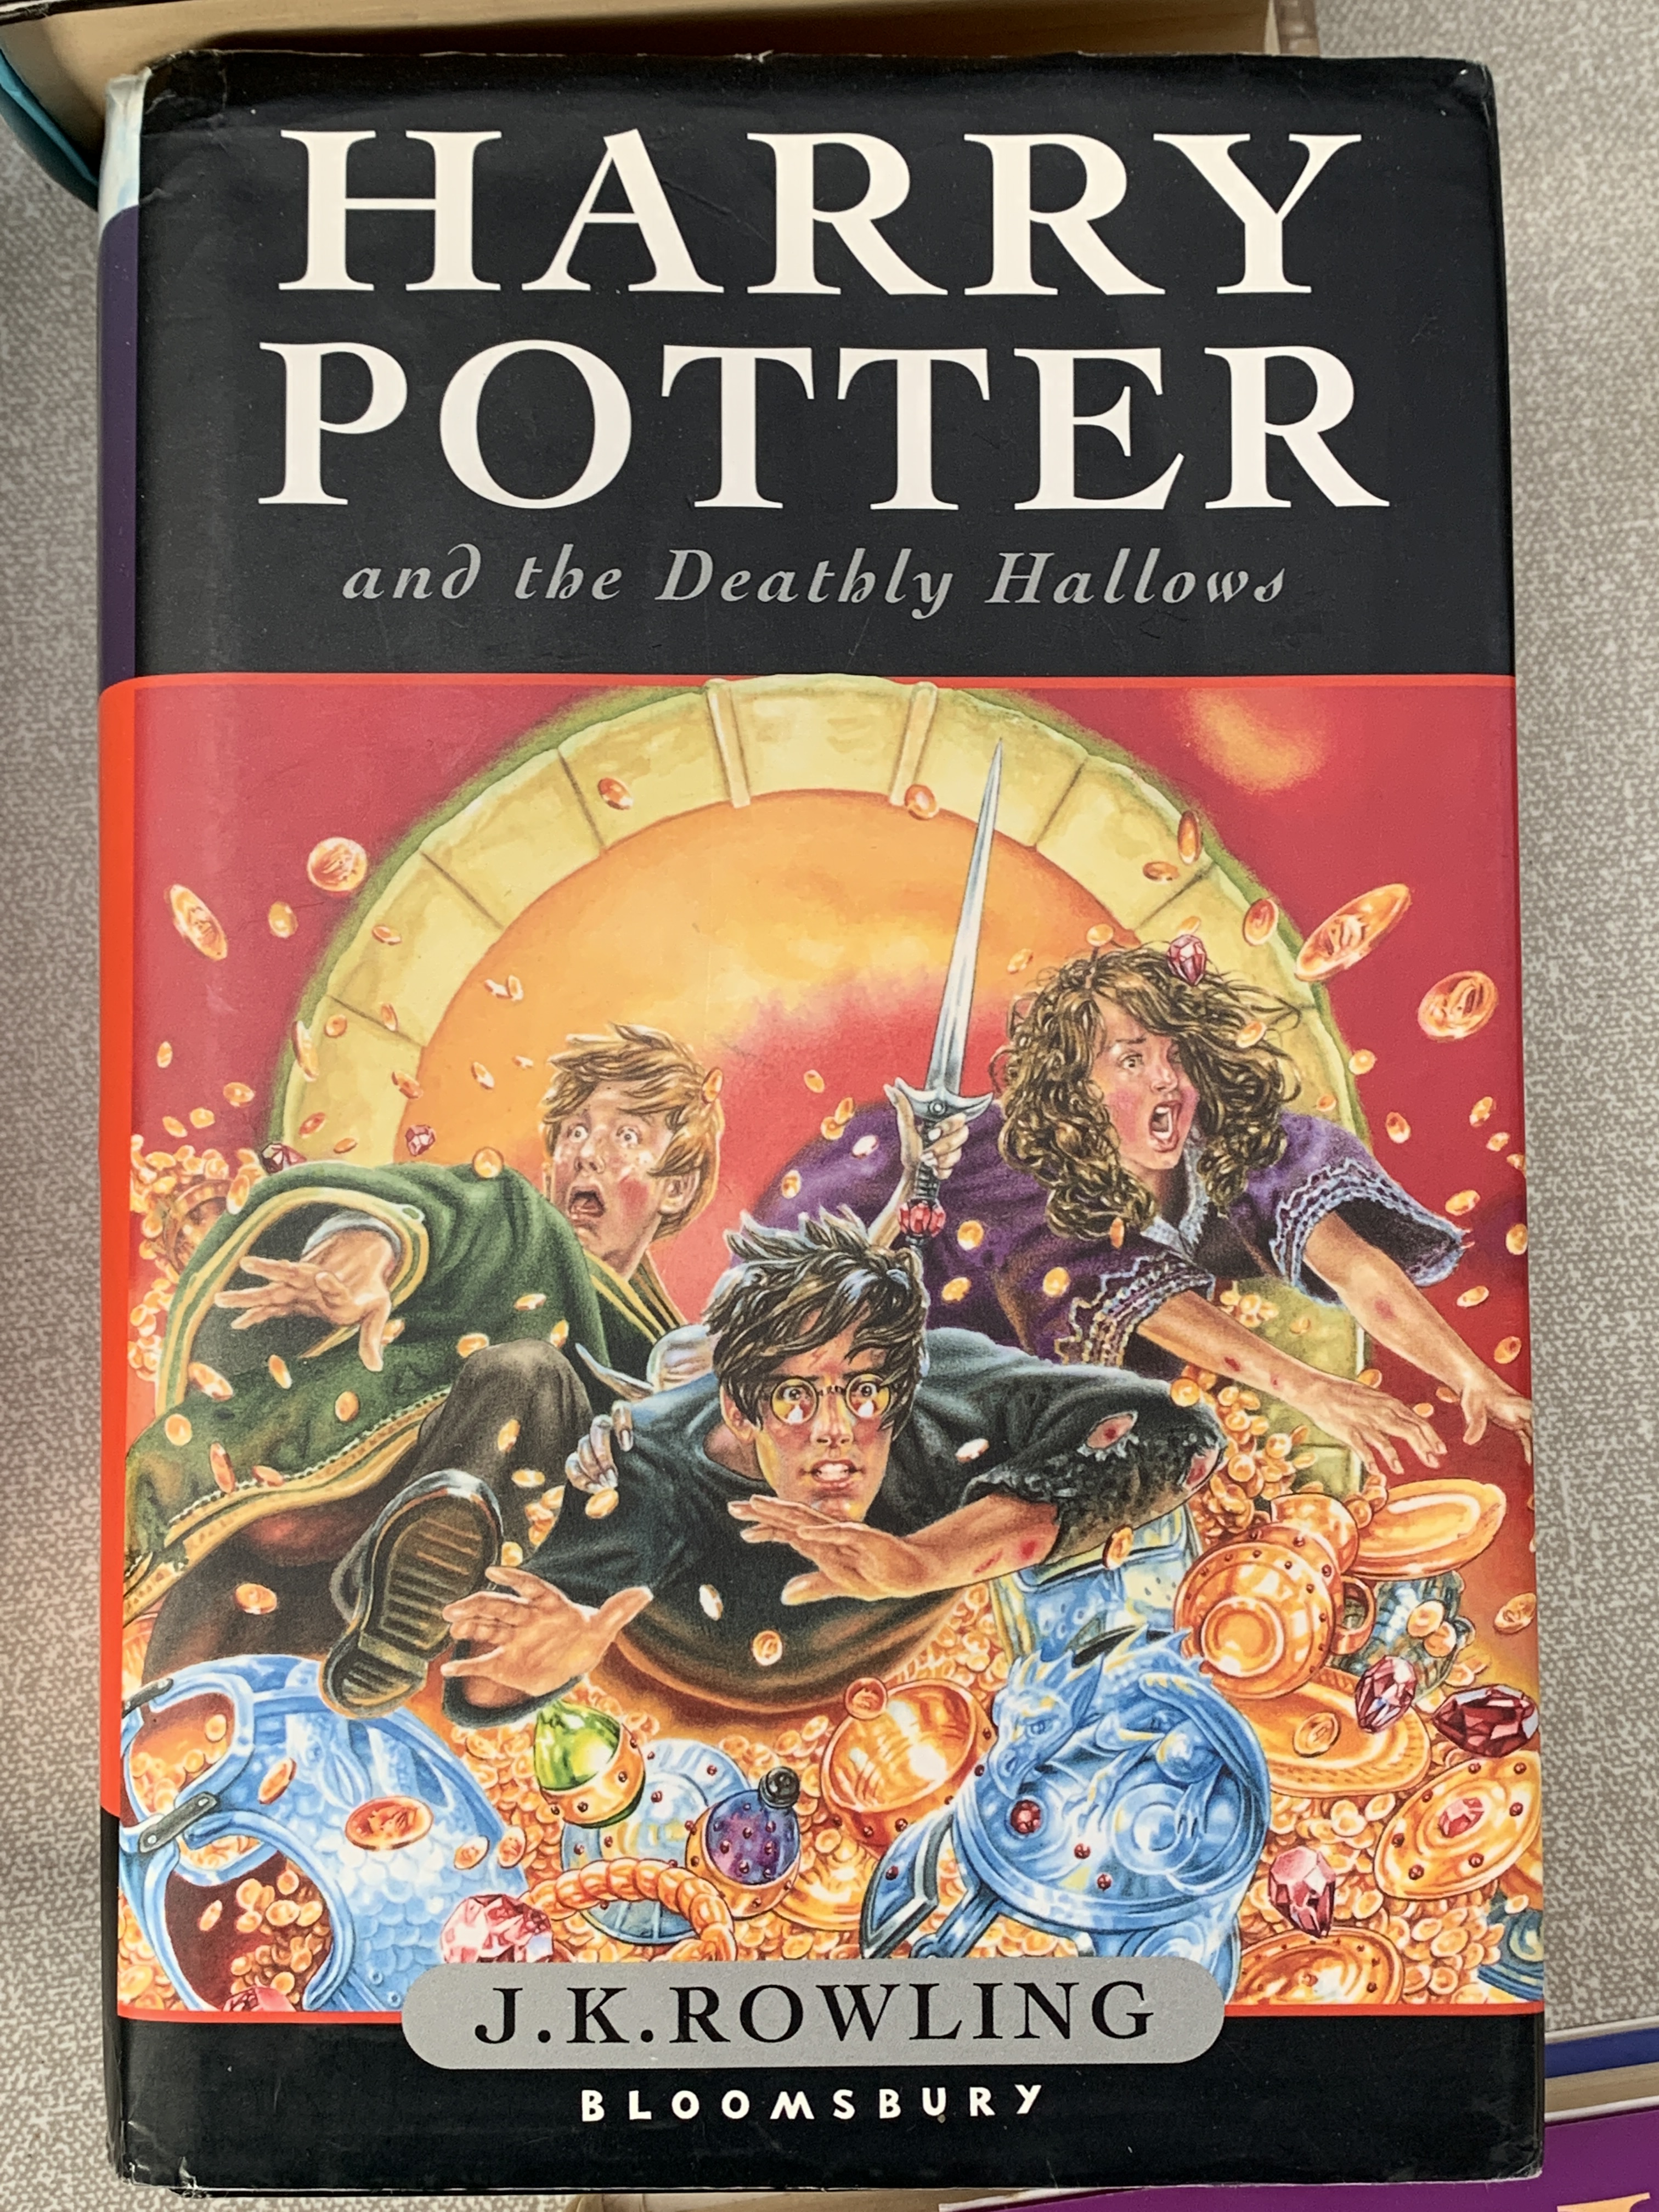 Harry Potter and the Deathly Hallows, 1st Edition